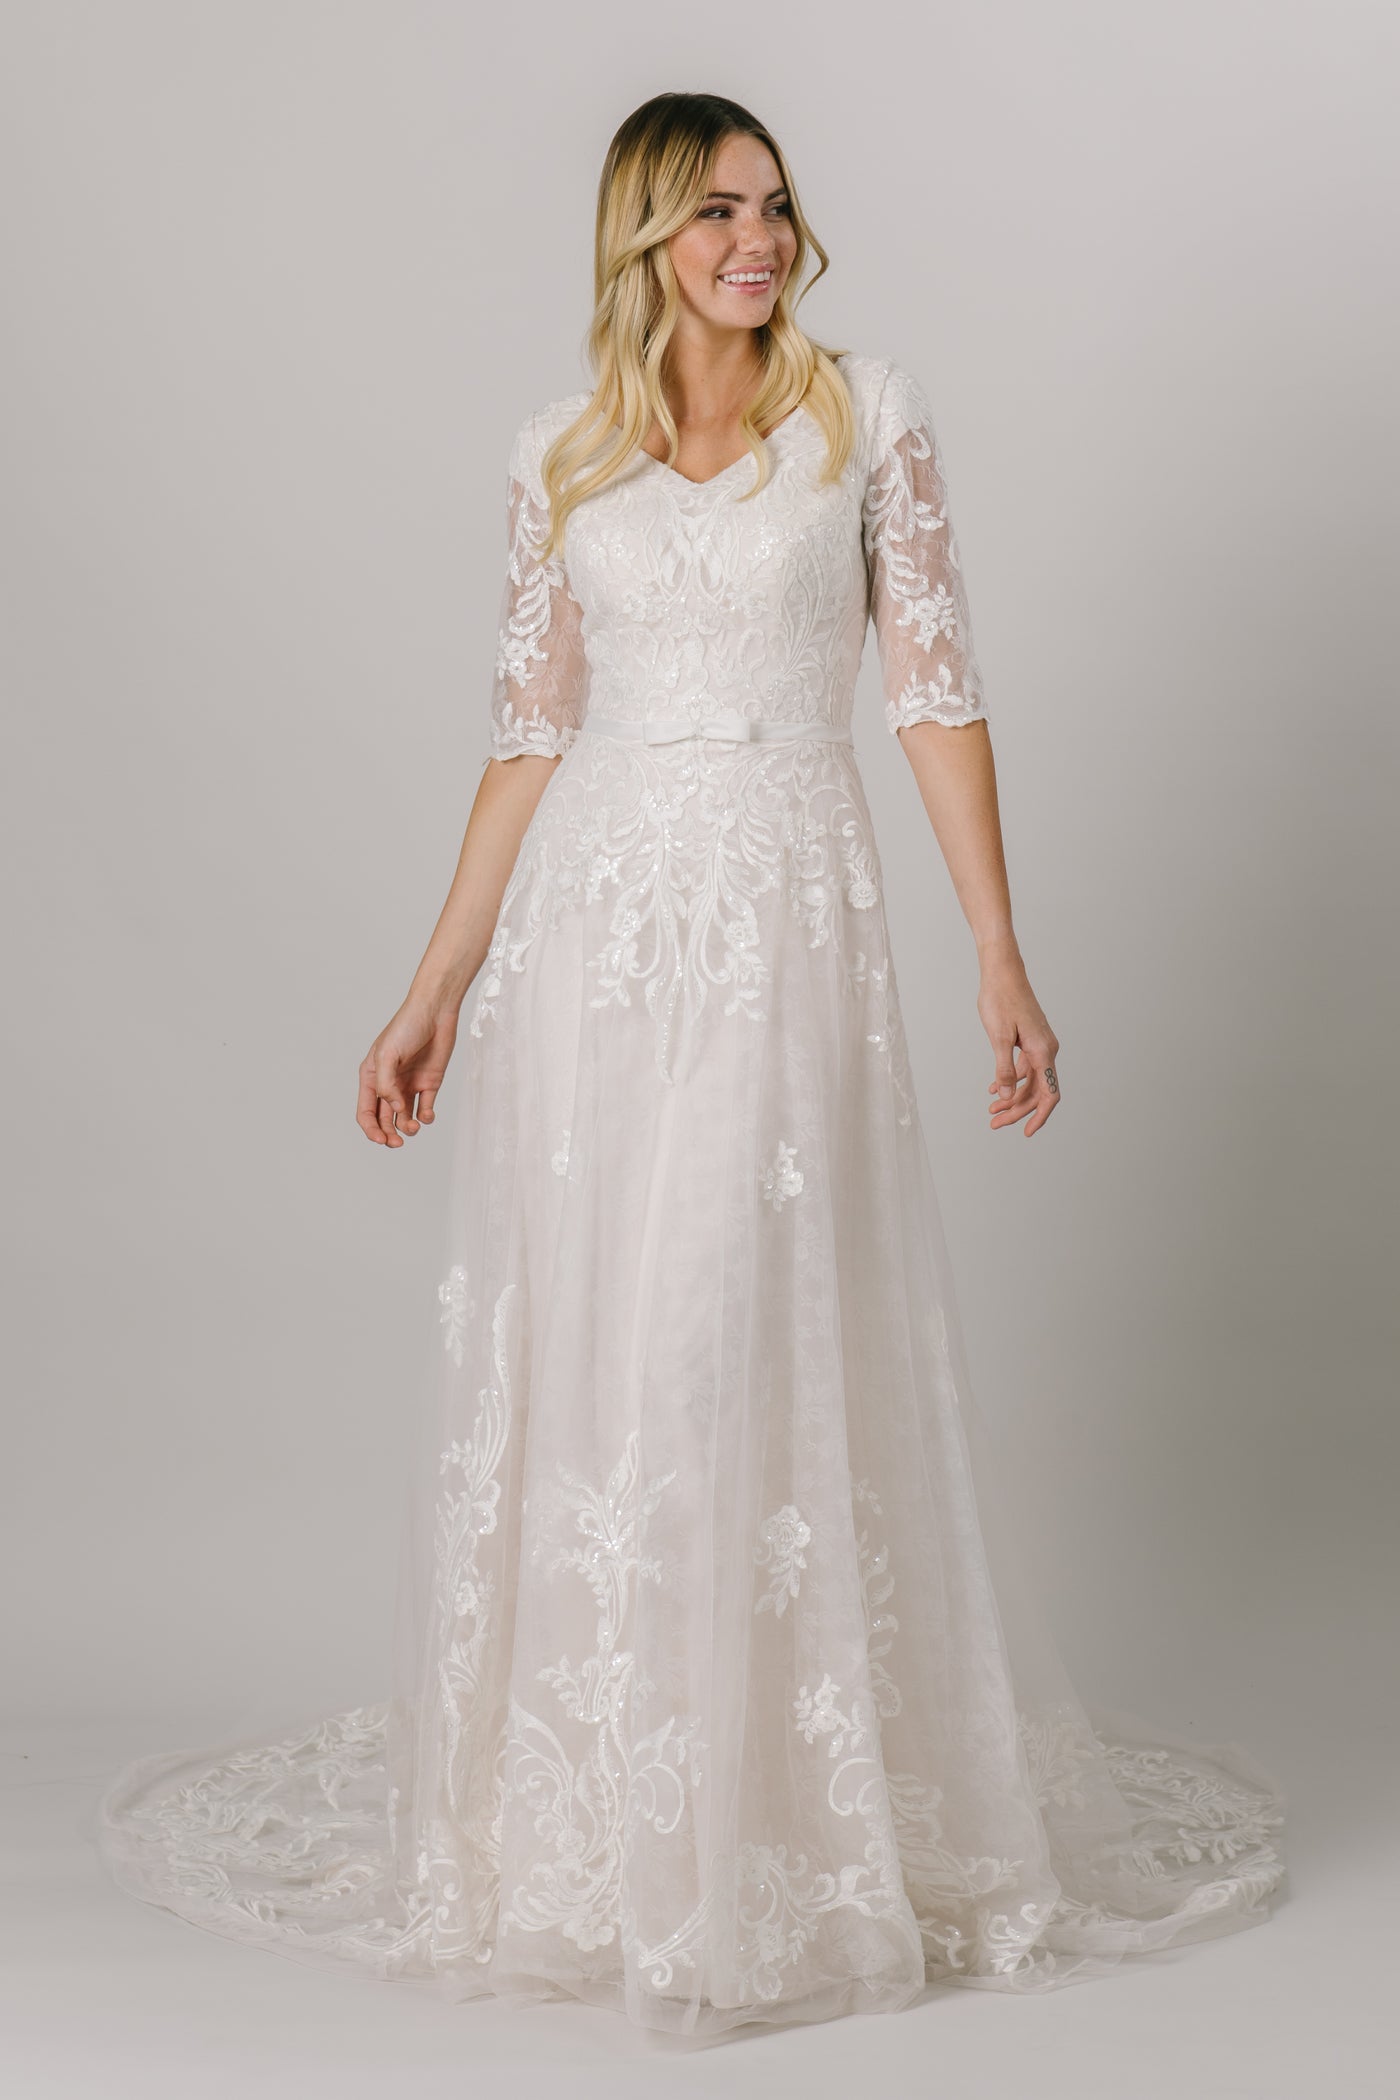 This modest wedding dress has a flattering a-line fit with an absolutely gorgeous lace pattern. With half sleeves and buttons down the back, how could we say no?  Style Love: Little belt with an adorable bow to accentuate the waist!